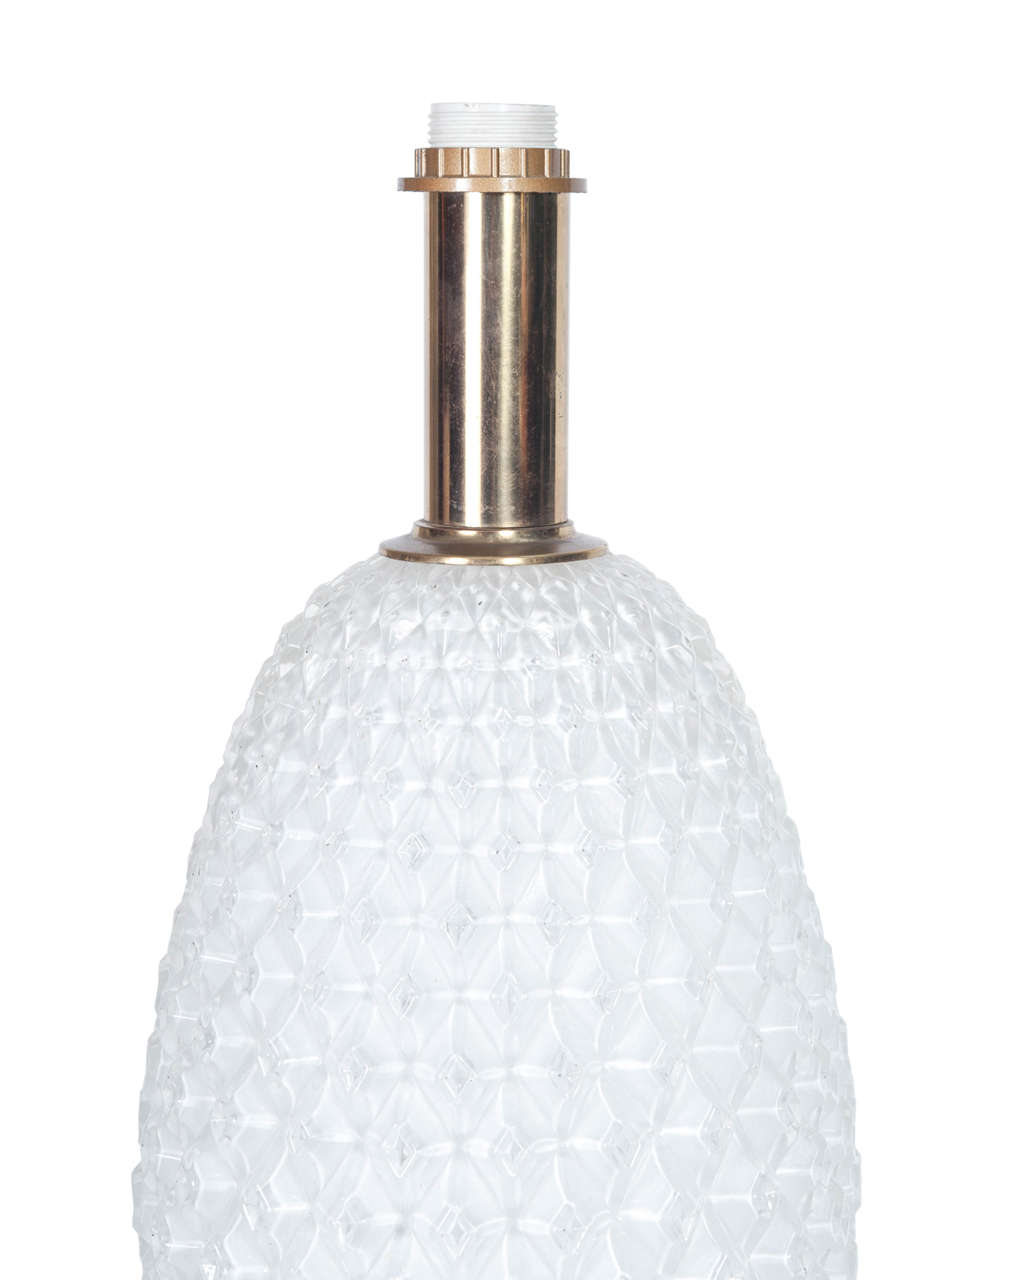 Mid-20th Century 1950s White Opaline Glass and Brass Italian Table Lamp For Sale